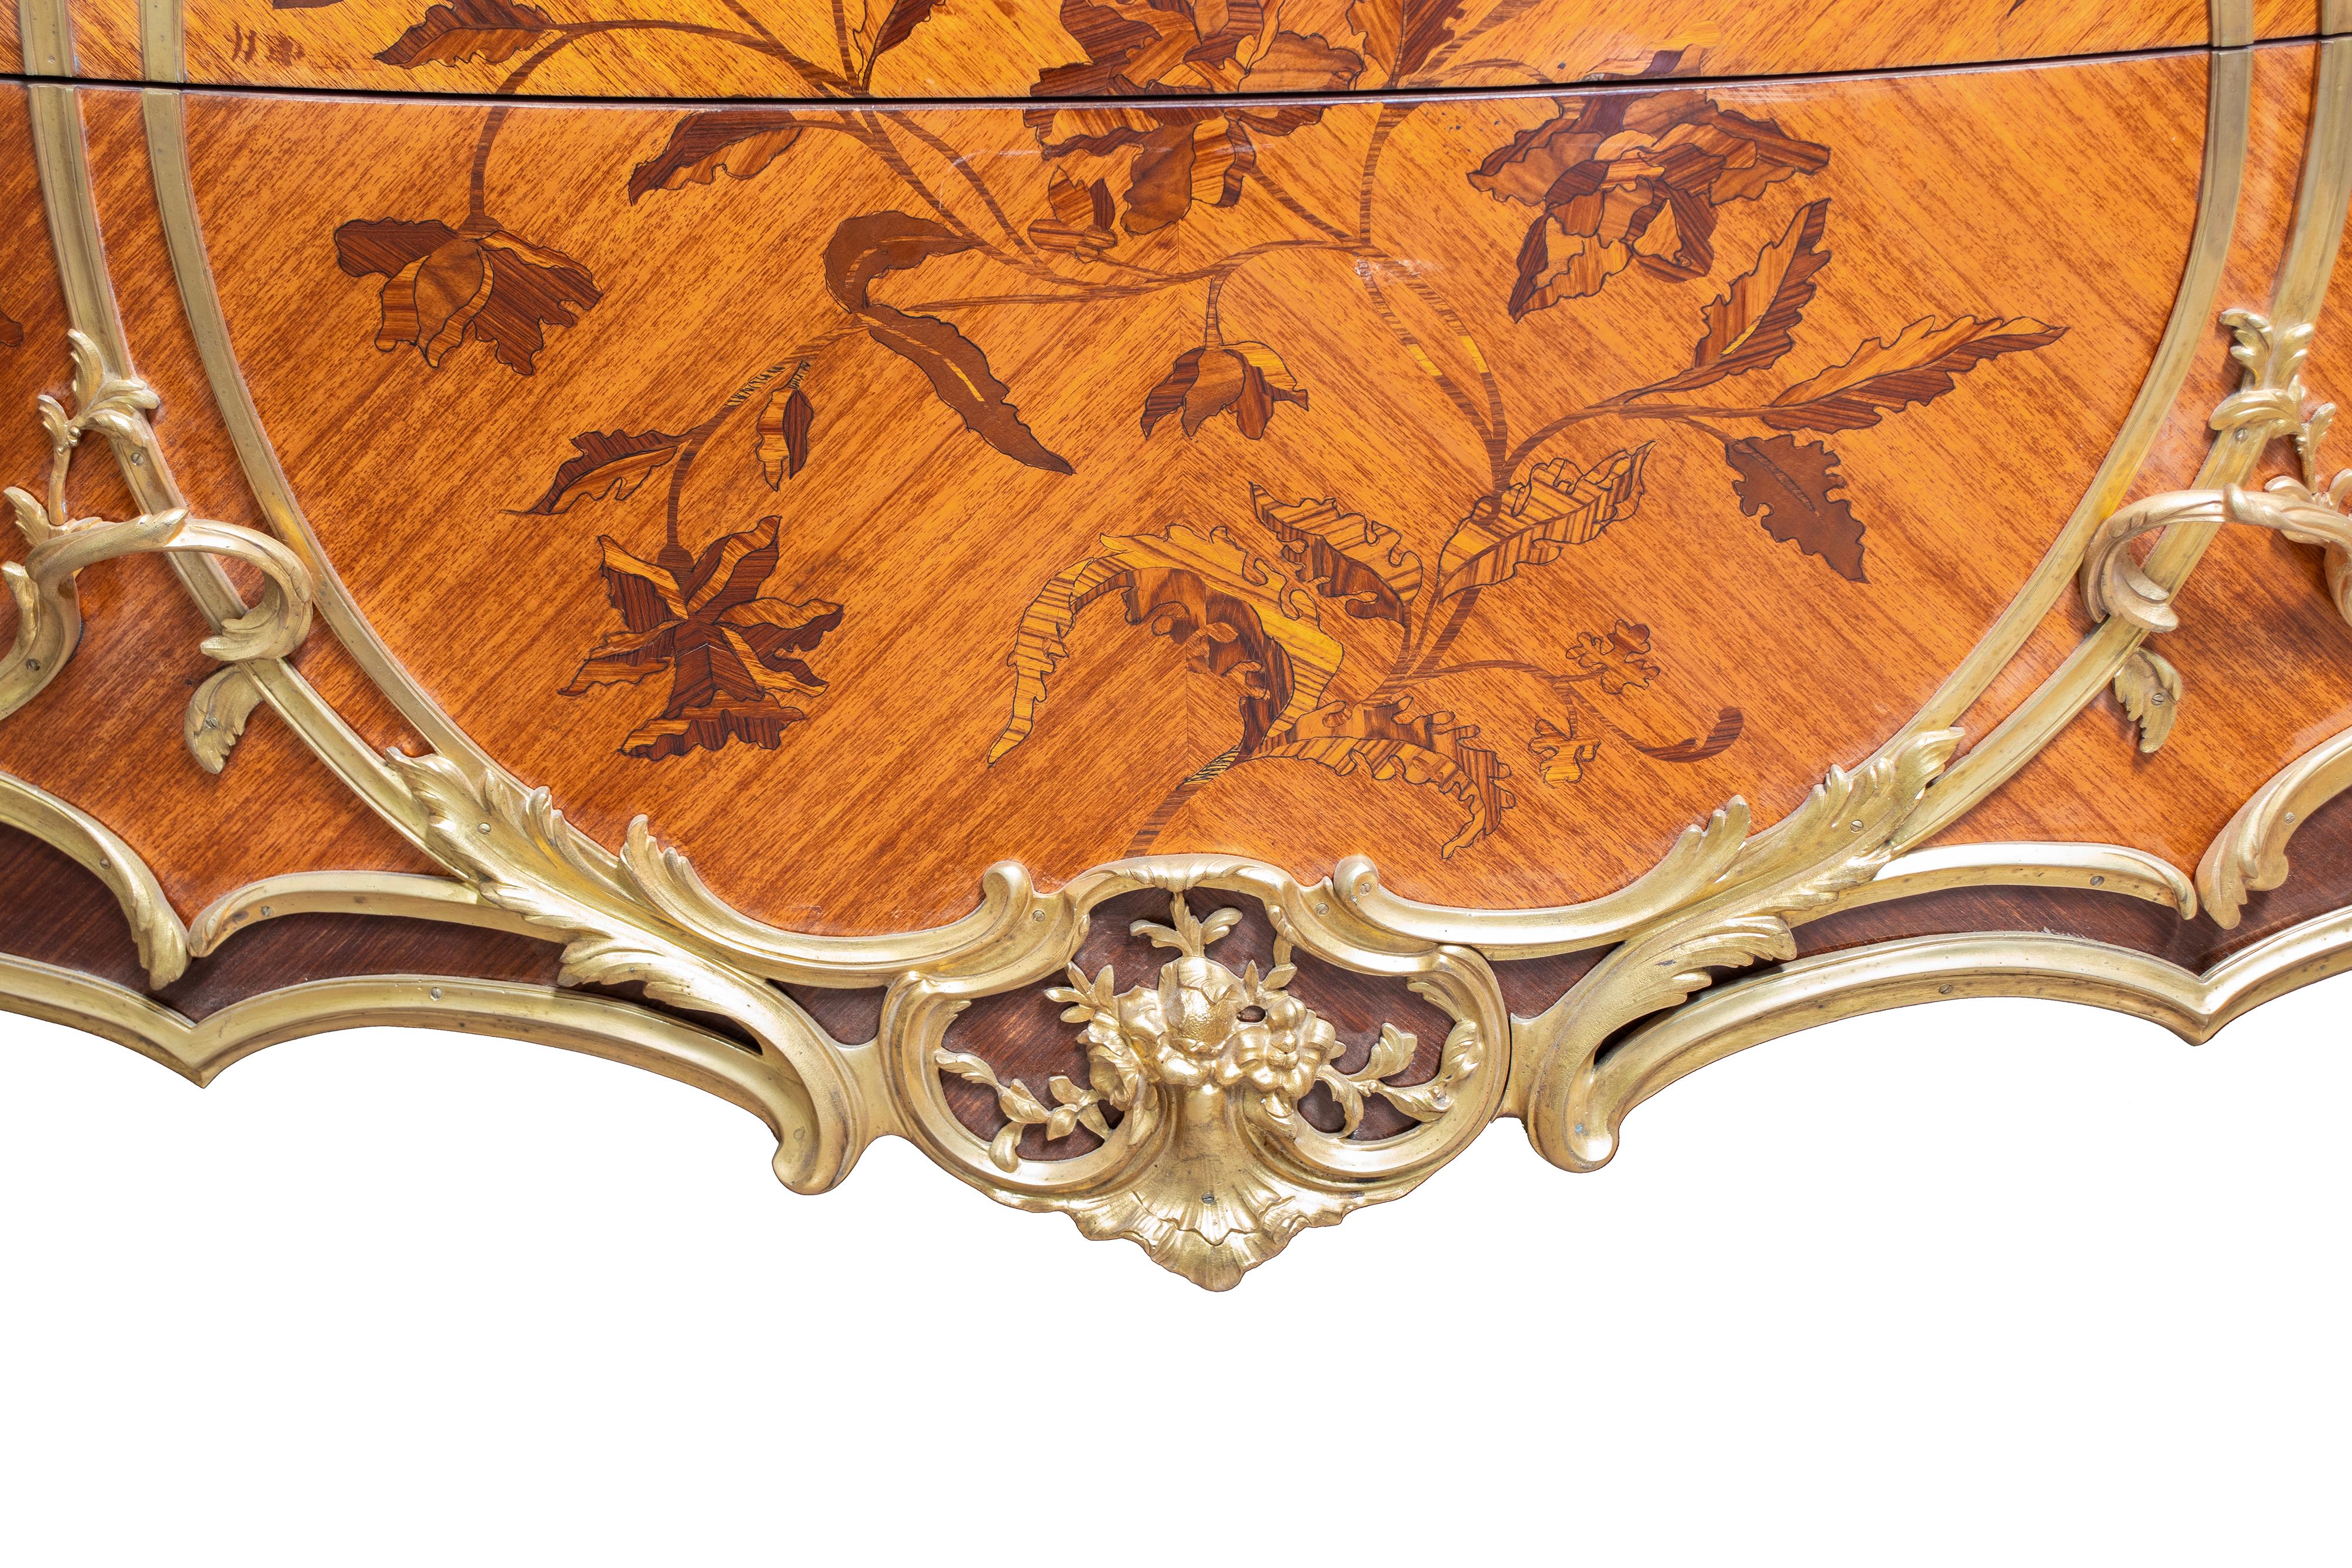 Pair of French 19th Century commodes in the Louis XV style. The curved solid wood bodies are adorned with glossy lacquered marquetry with foliage motifs. The ormolu mounts frame the entire structure, including the feet, featuring rocaille motifs and